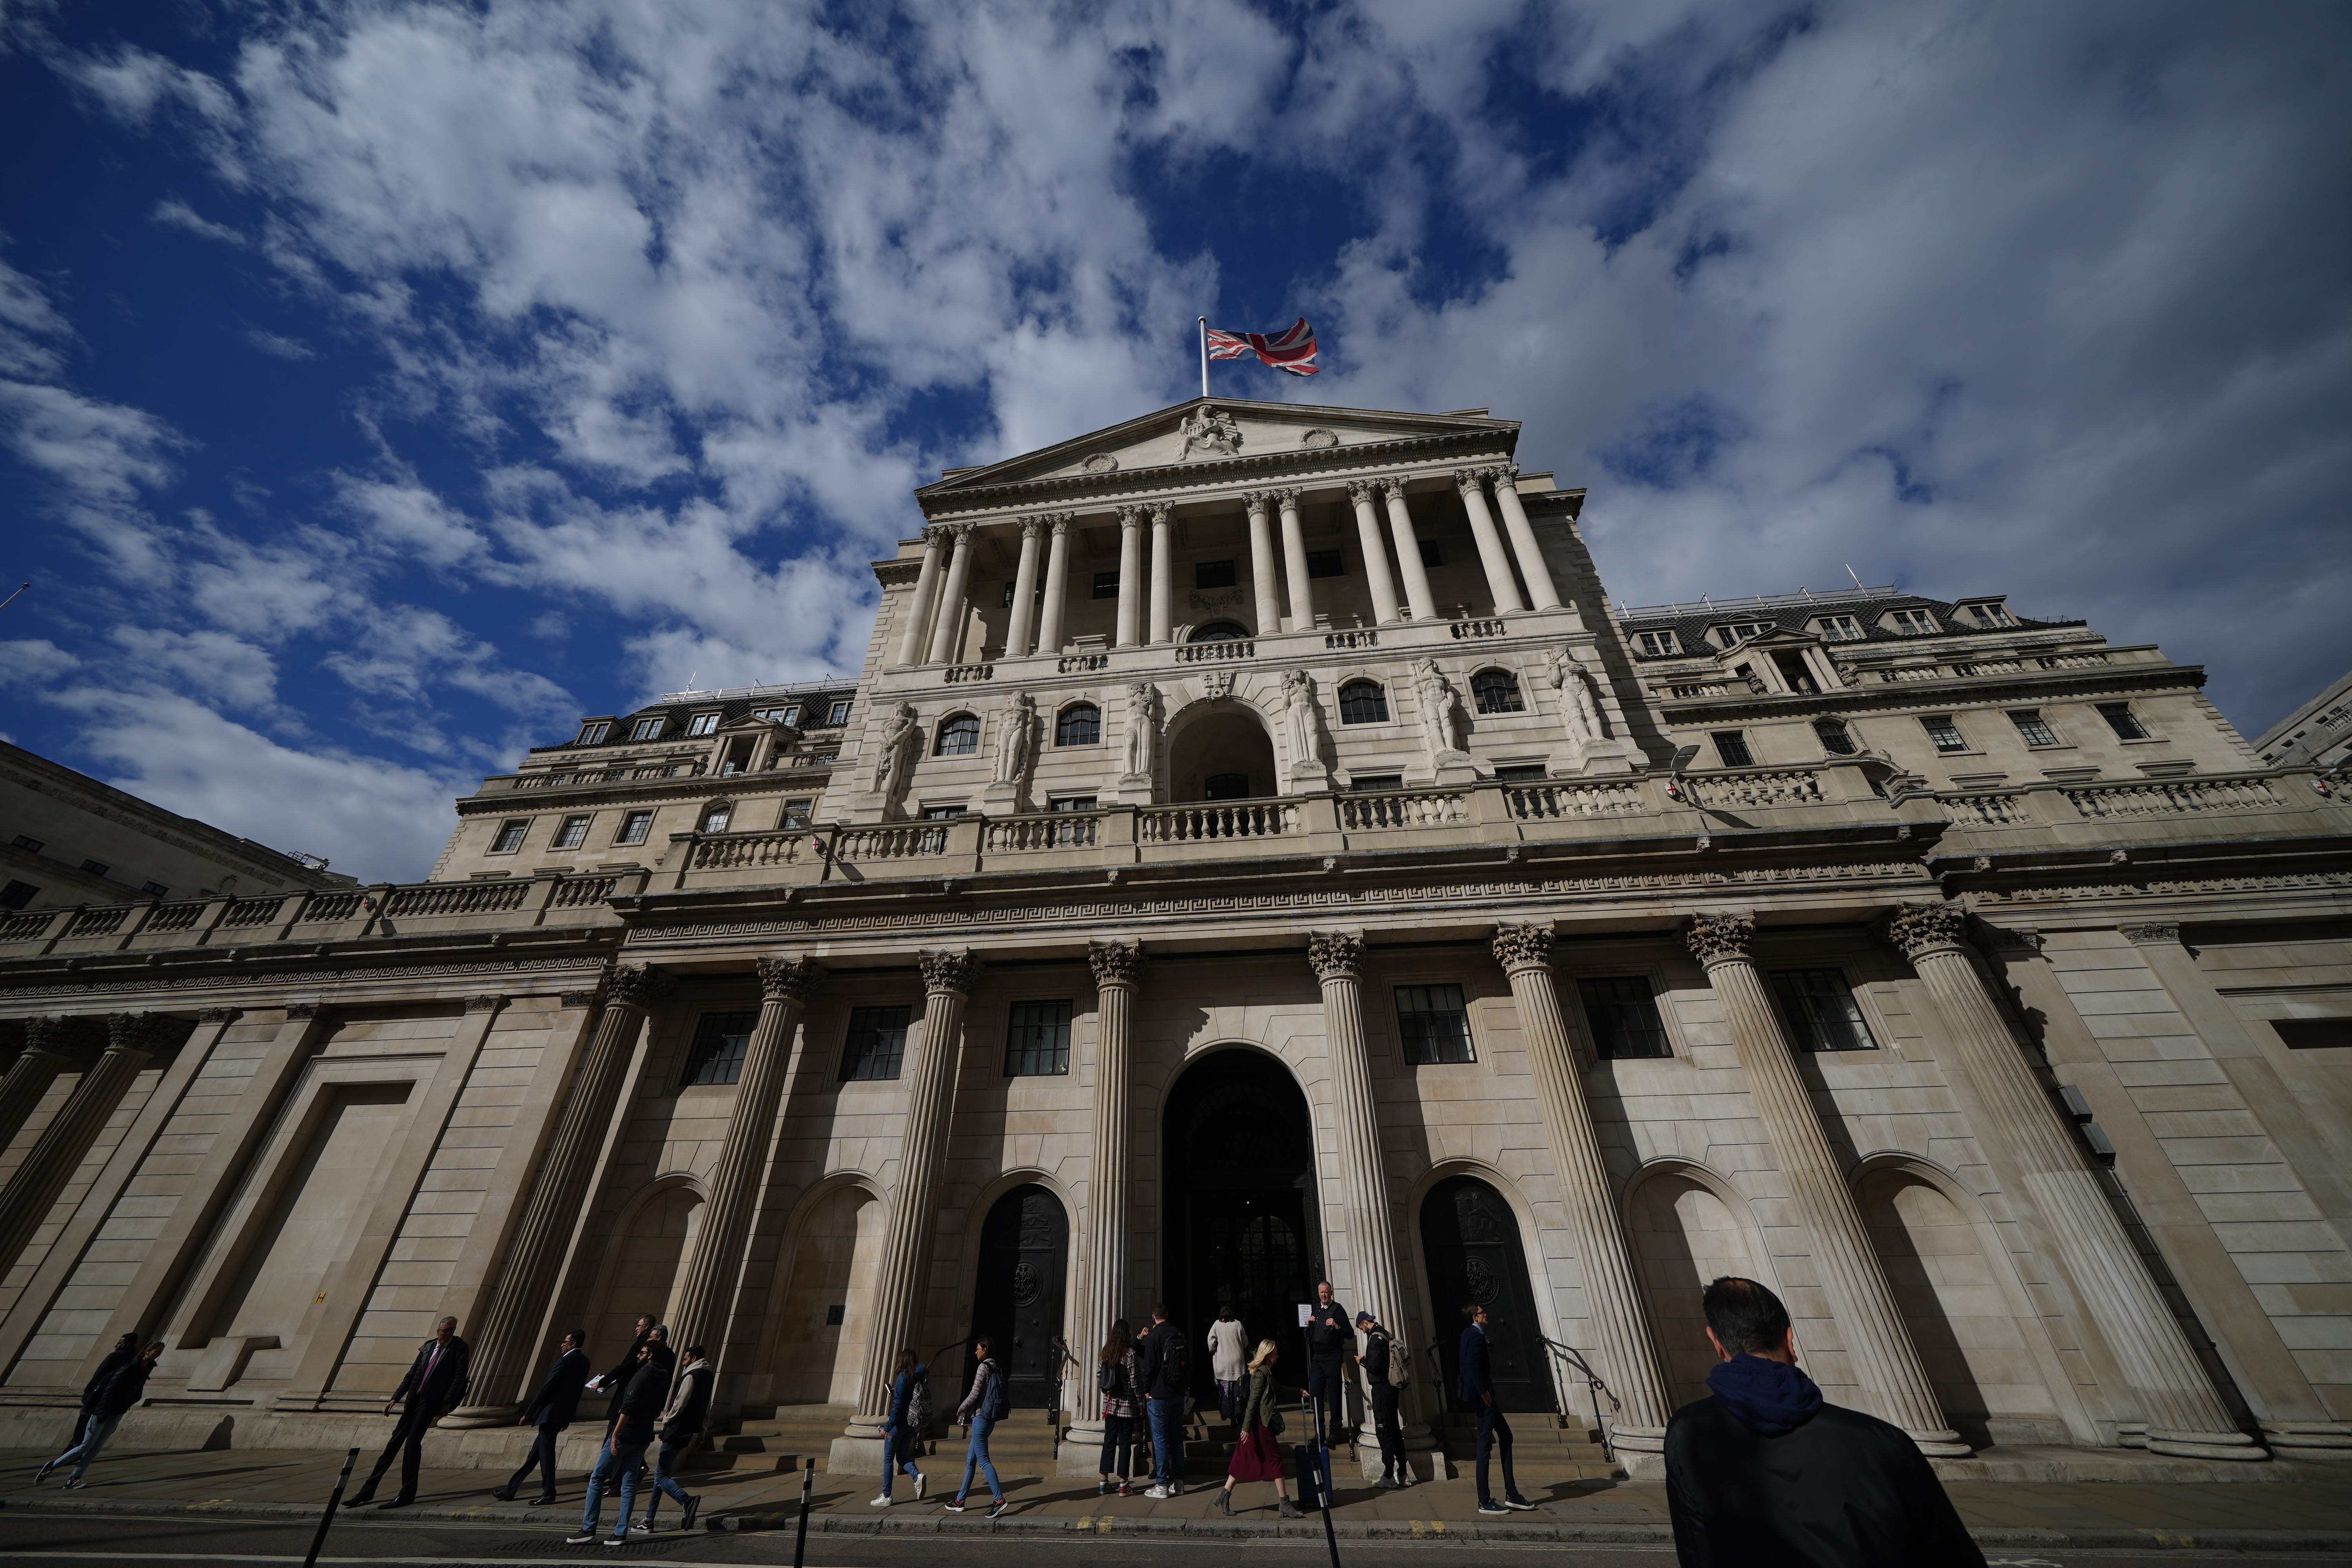 The Bank of England has raised interest rates for the 13th time in a row. The base rate now stands at 5 per cent, up from 4.5 per cent